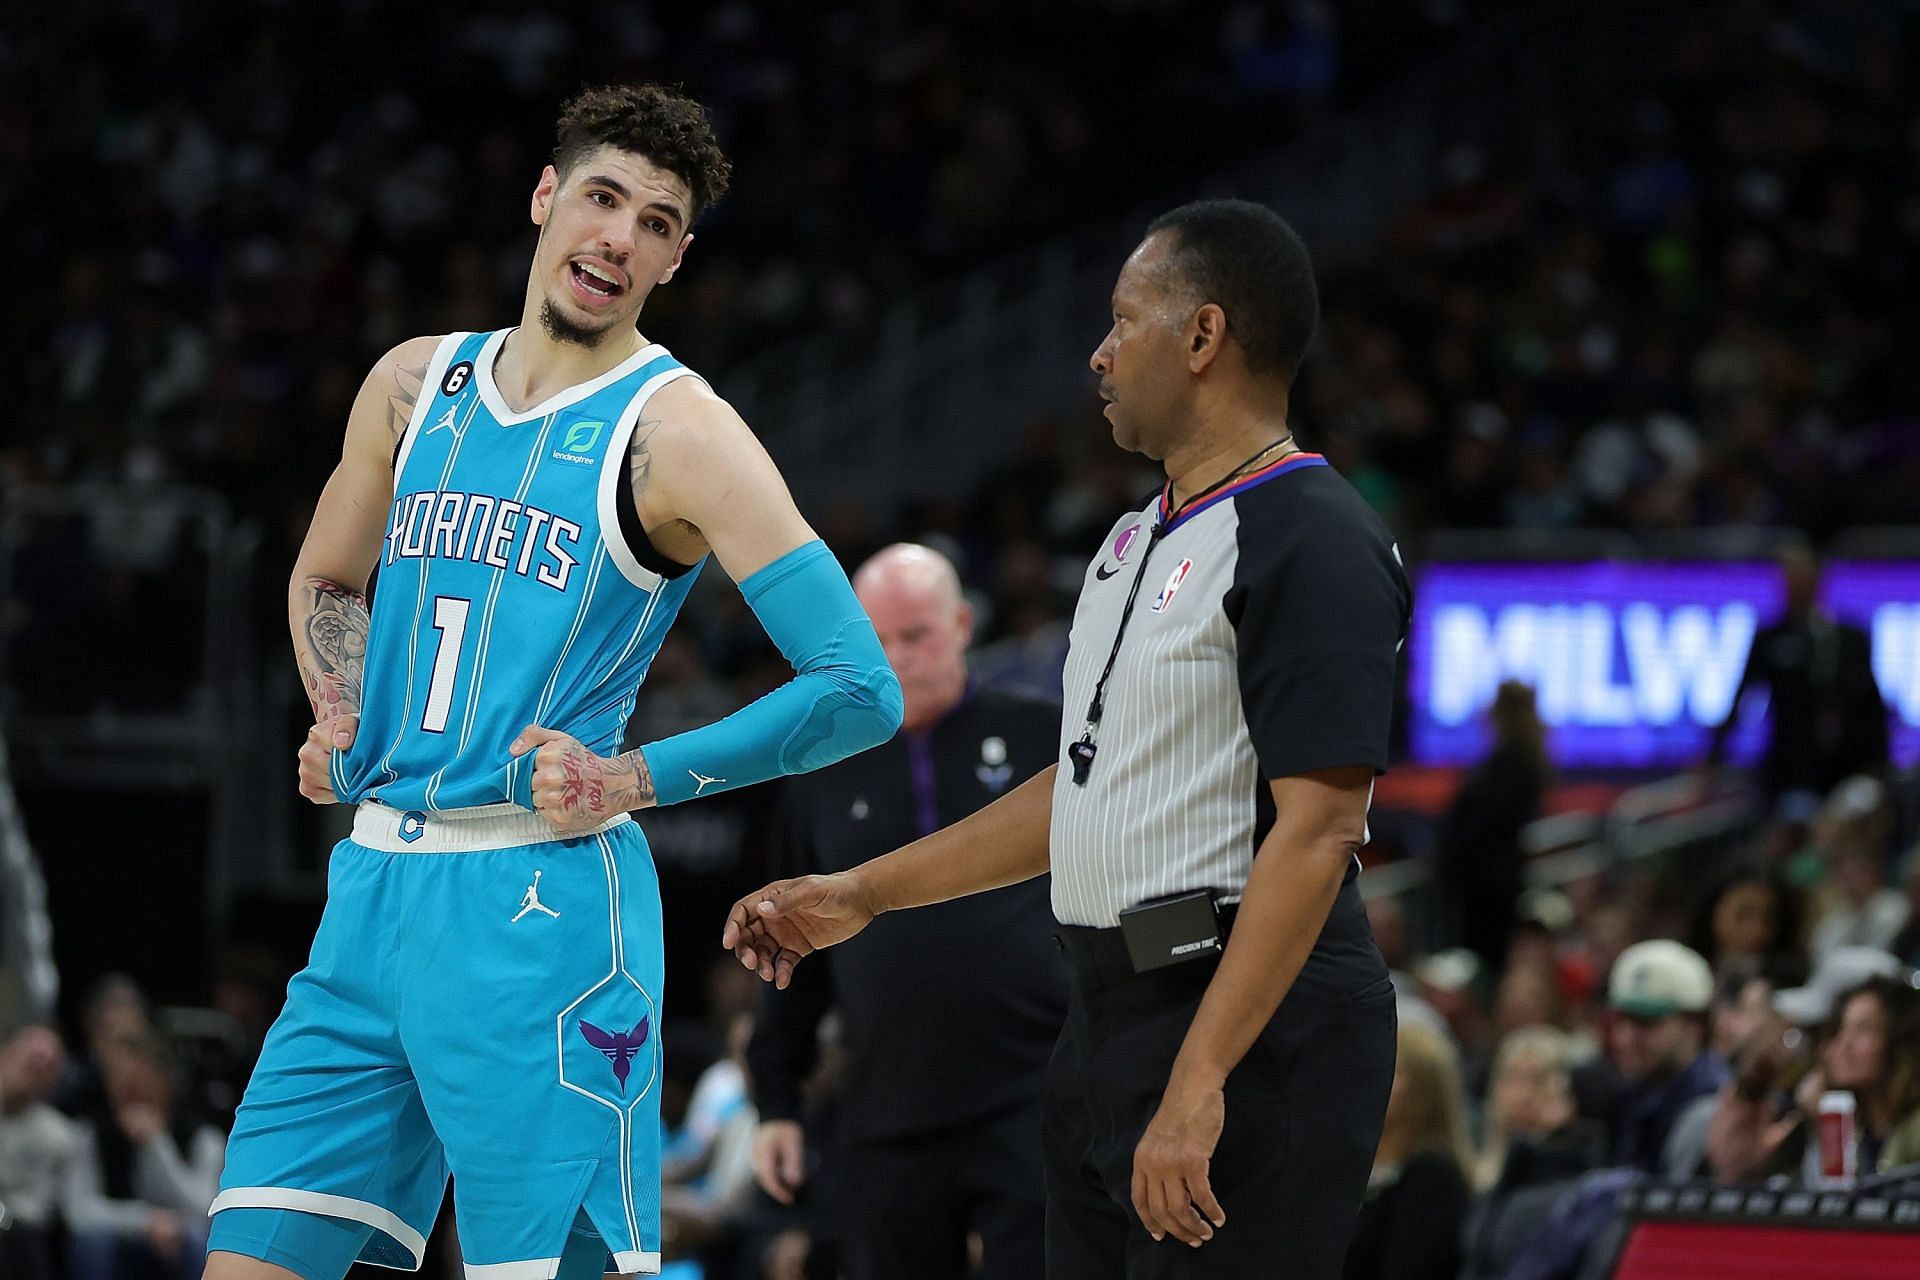 Charlotte Hornets All-Star guard LaMelo Ball speaking with a referee